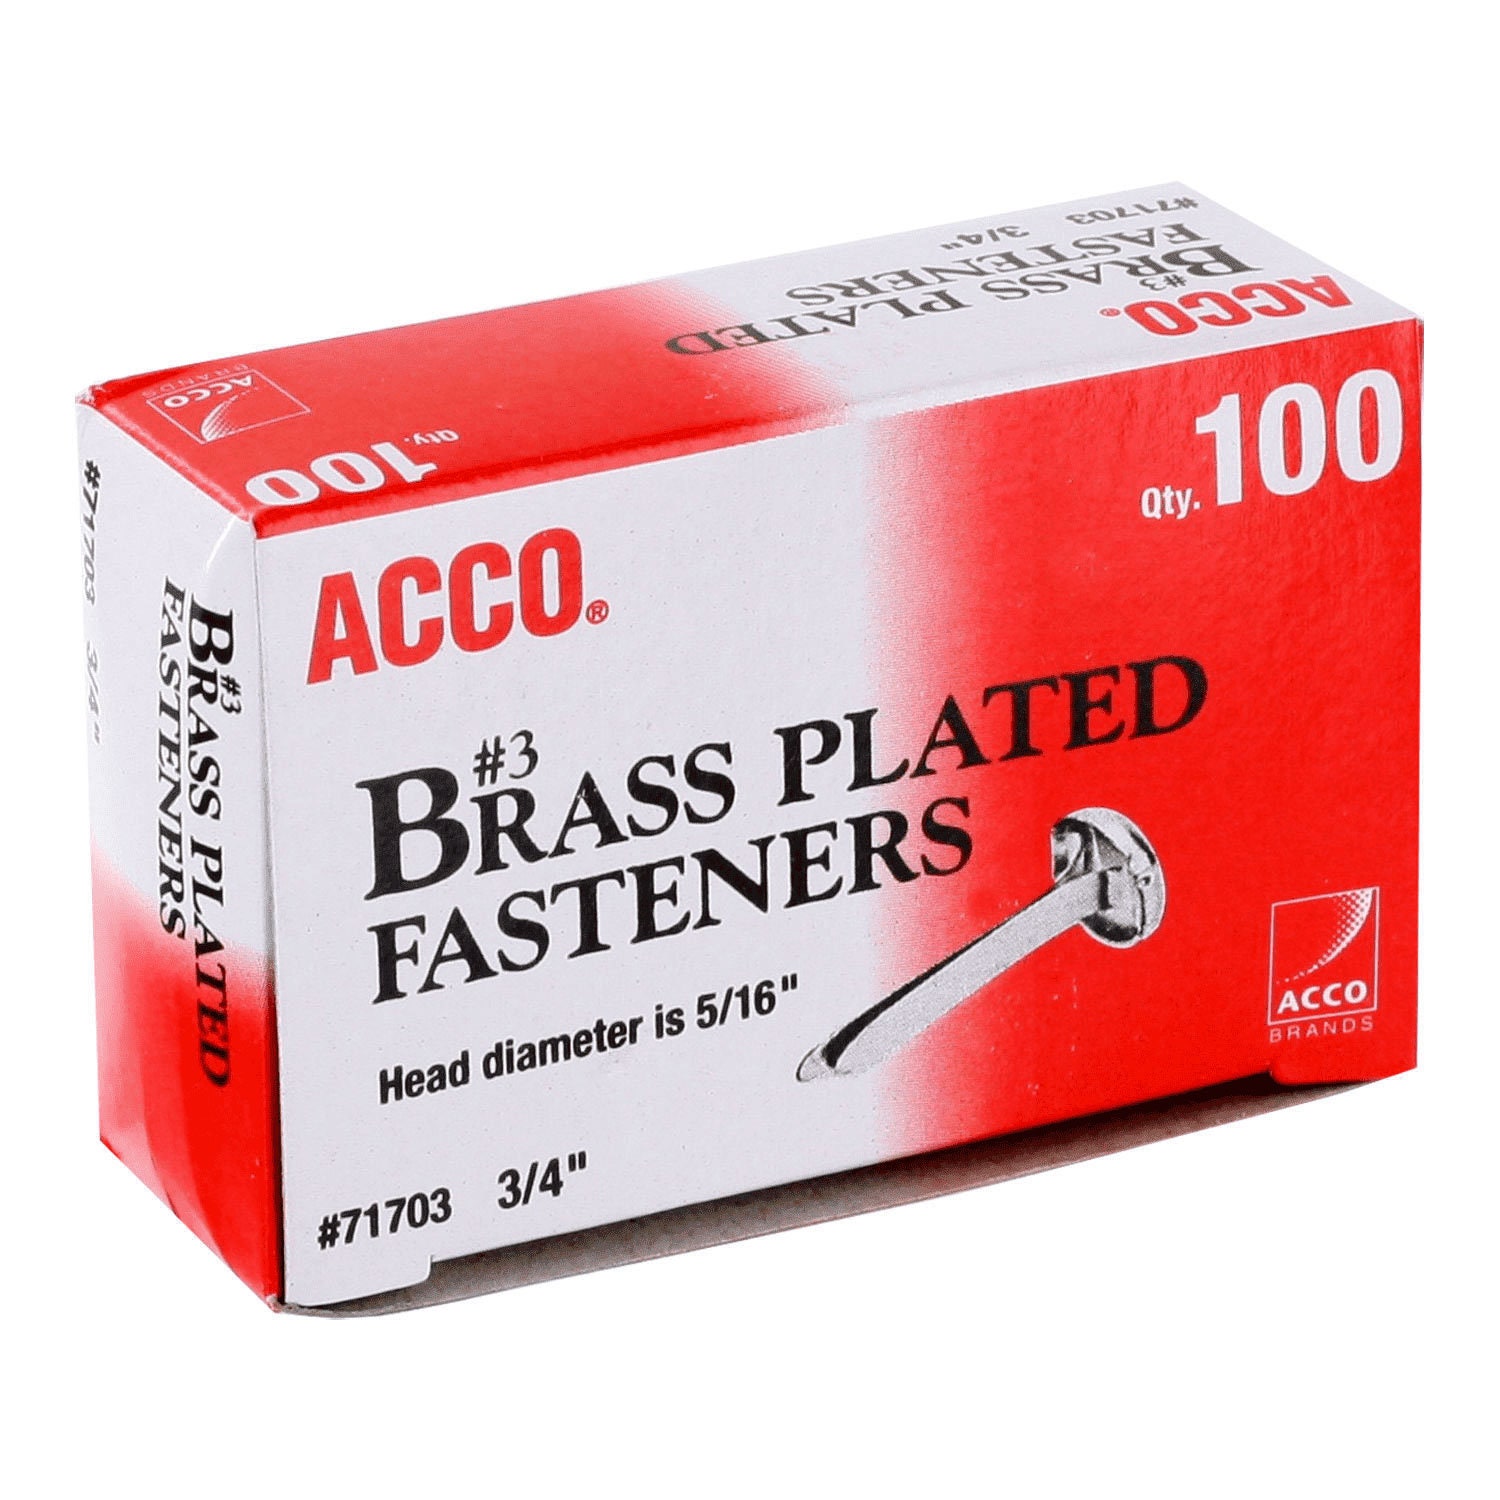 0.5 Brass Plated Paper Fasteners, 20 Boxes